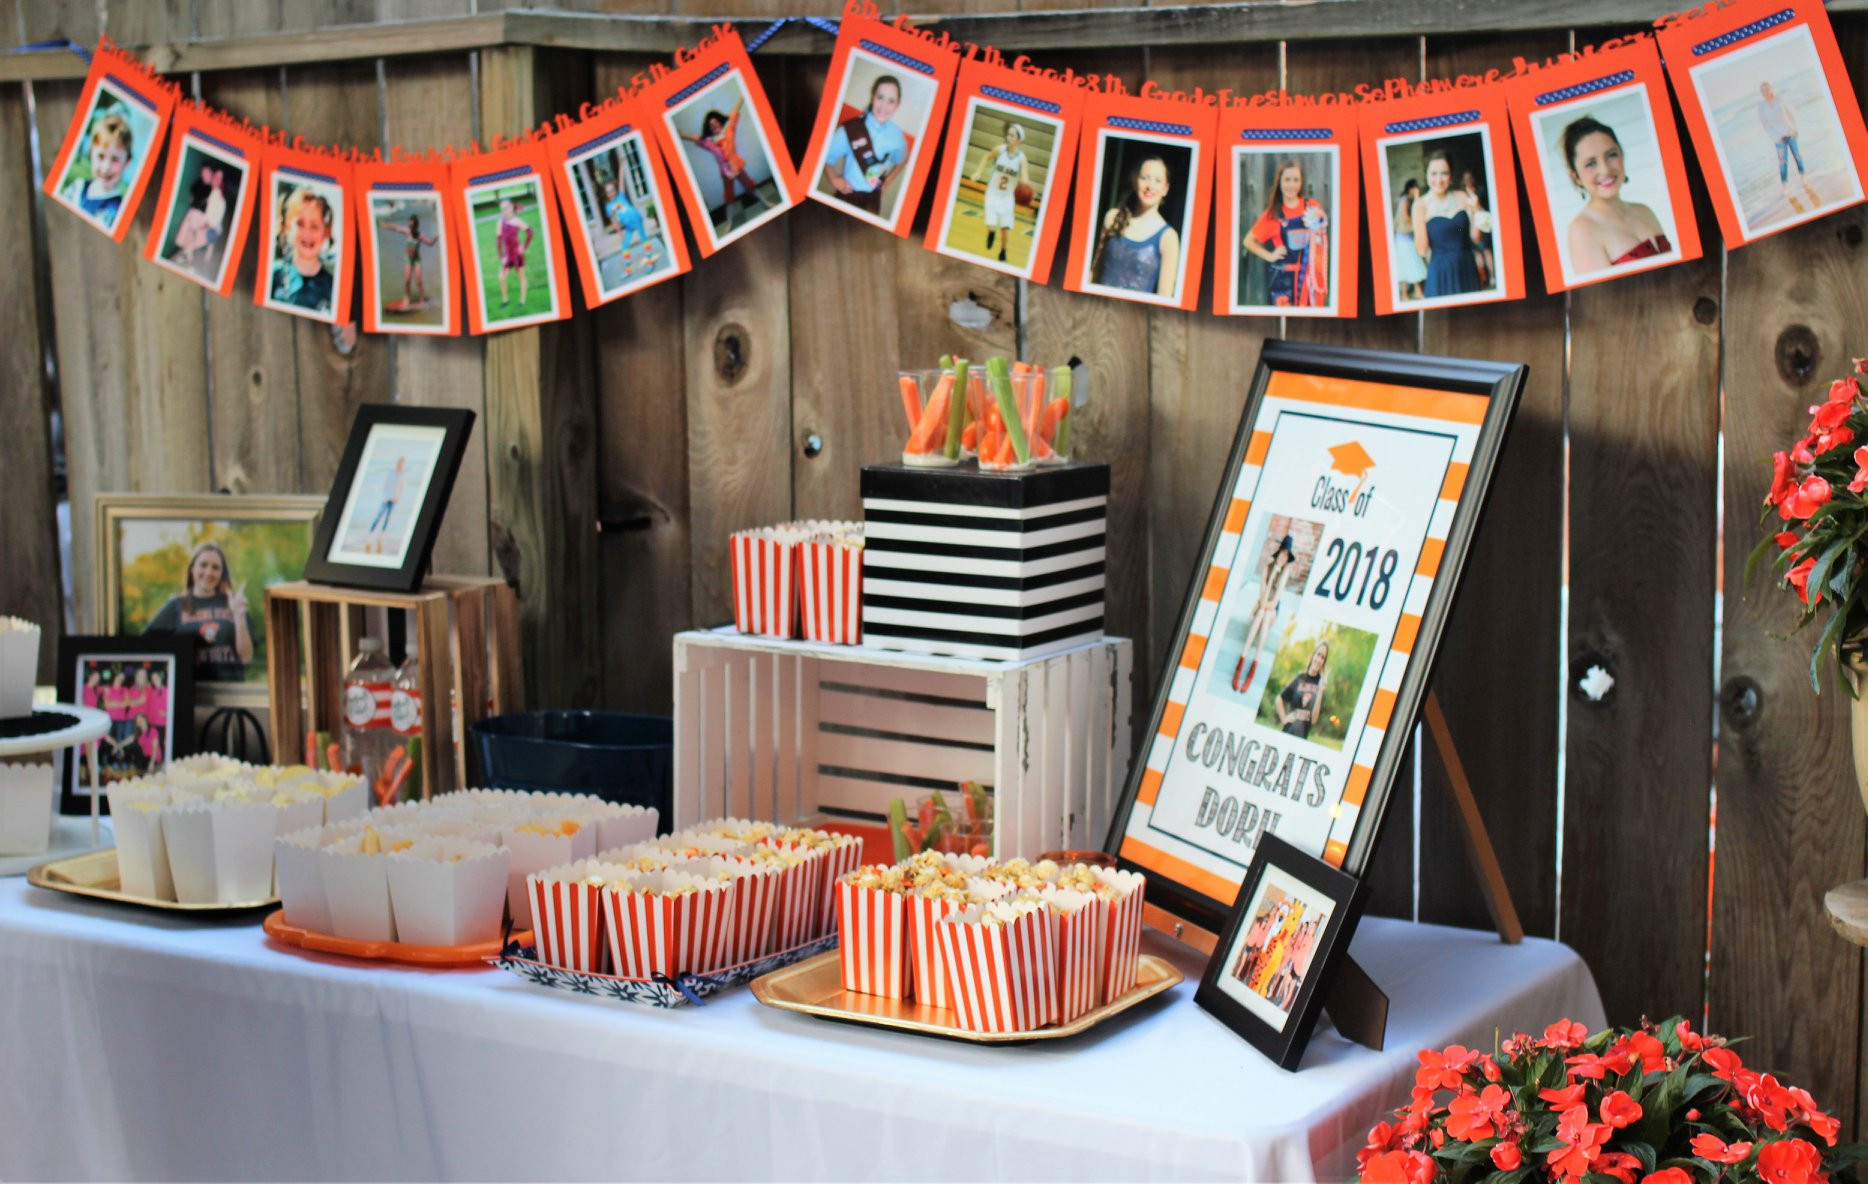 Creative Ideas For Graduation Party
 Graduation Party Ideas How to Celebrate Your Senior s Big Day